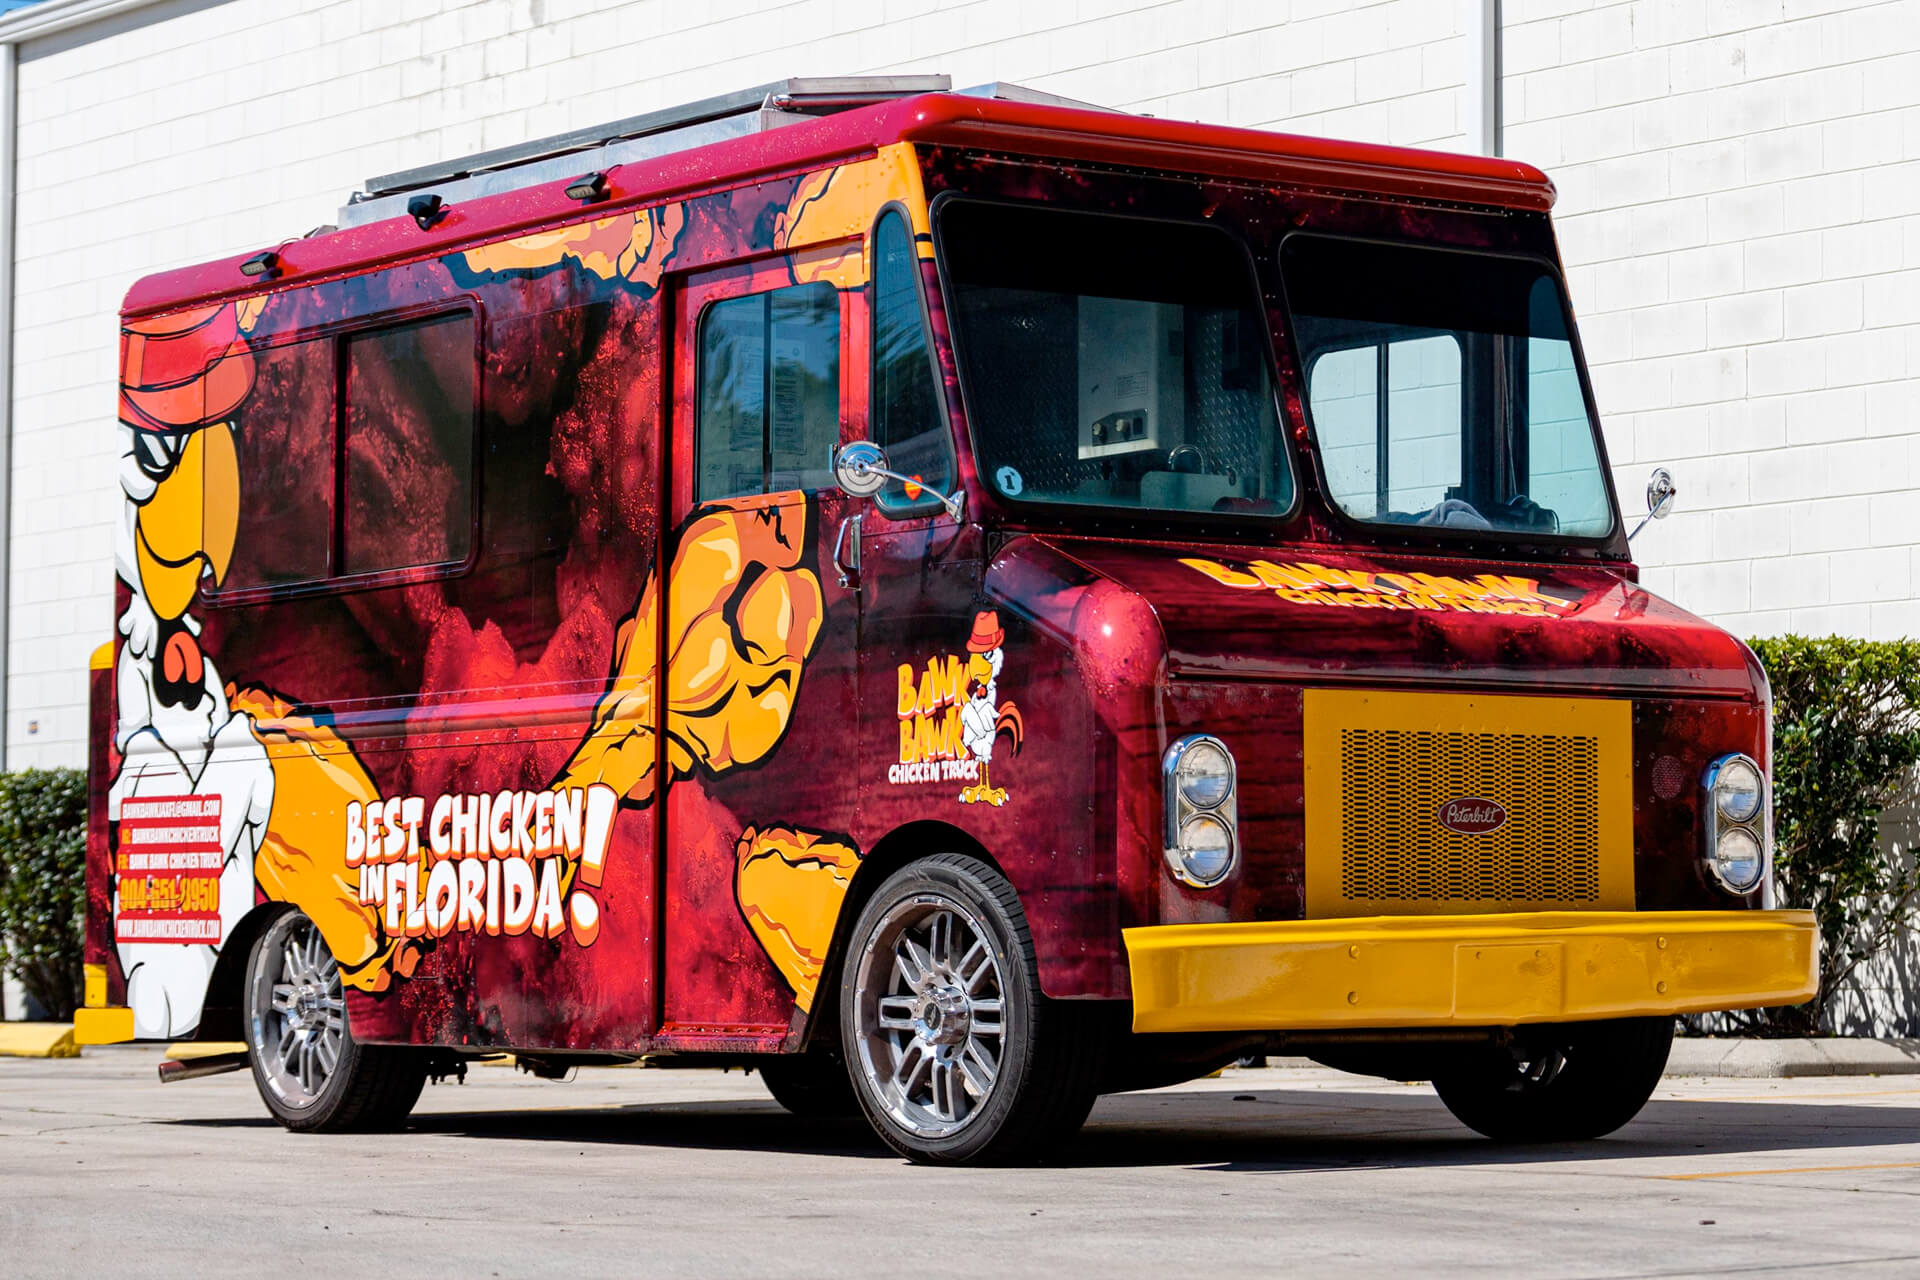 A food truck wrapped in local business graphics.